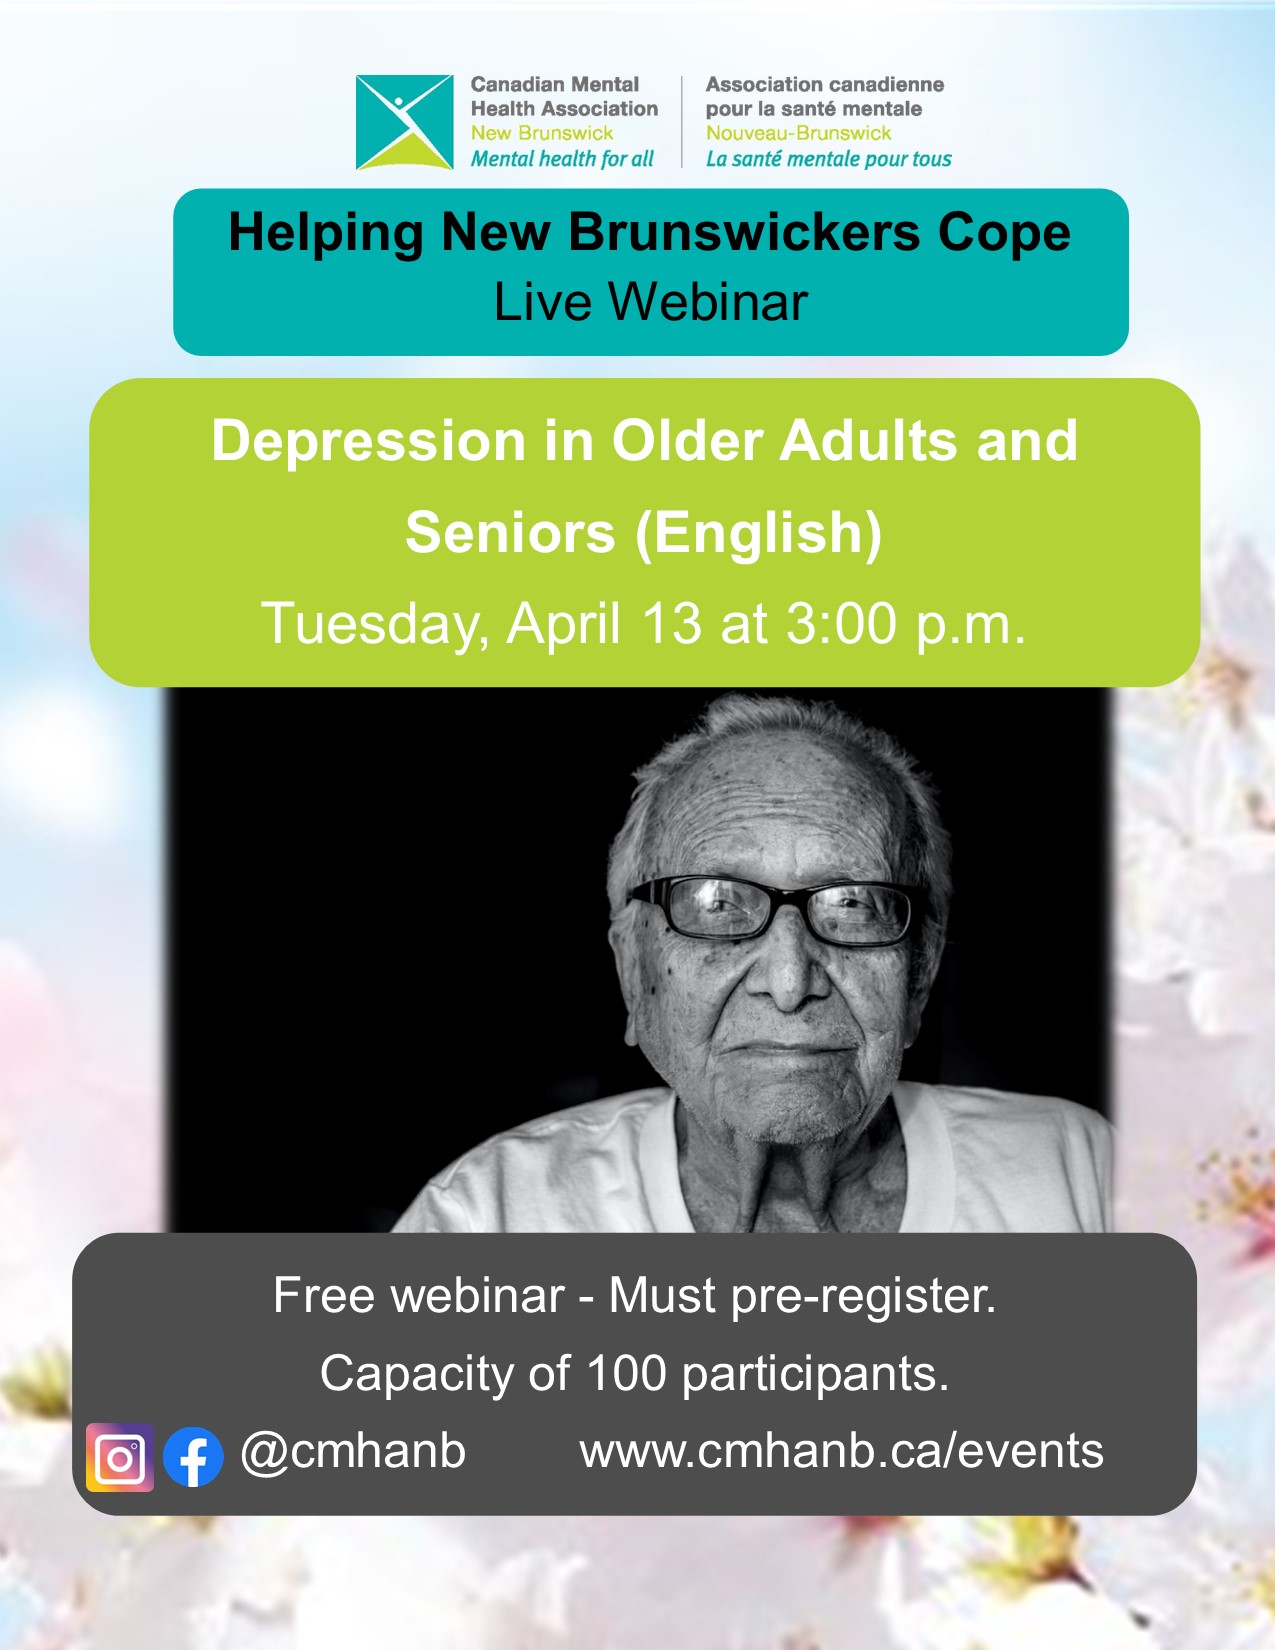 Depression in Older Adults and Seniors (English)